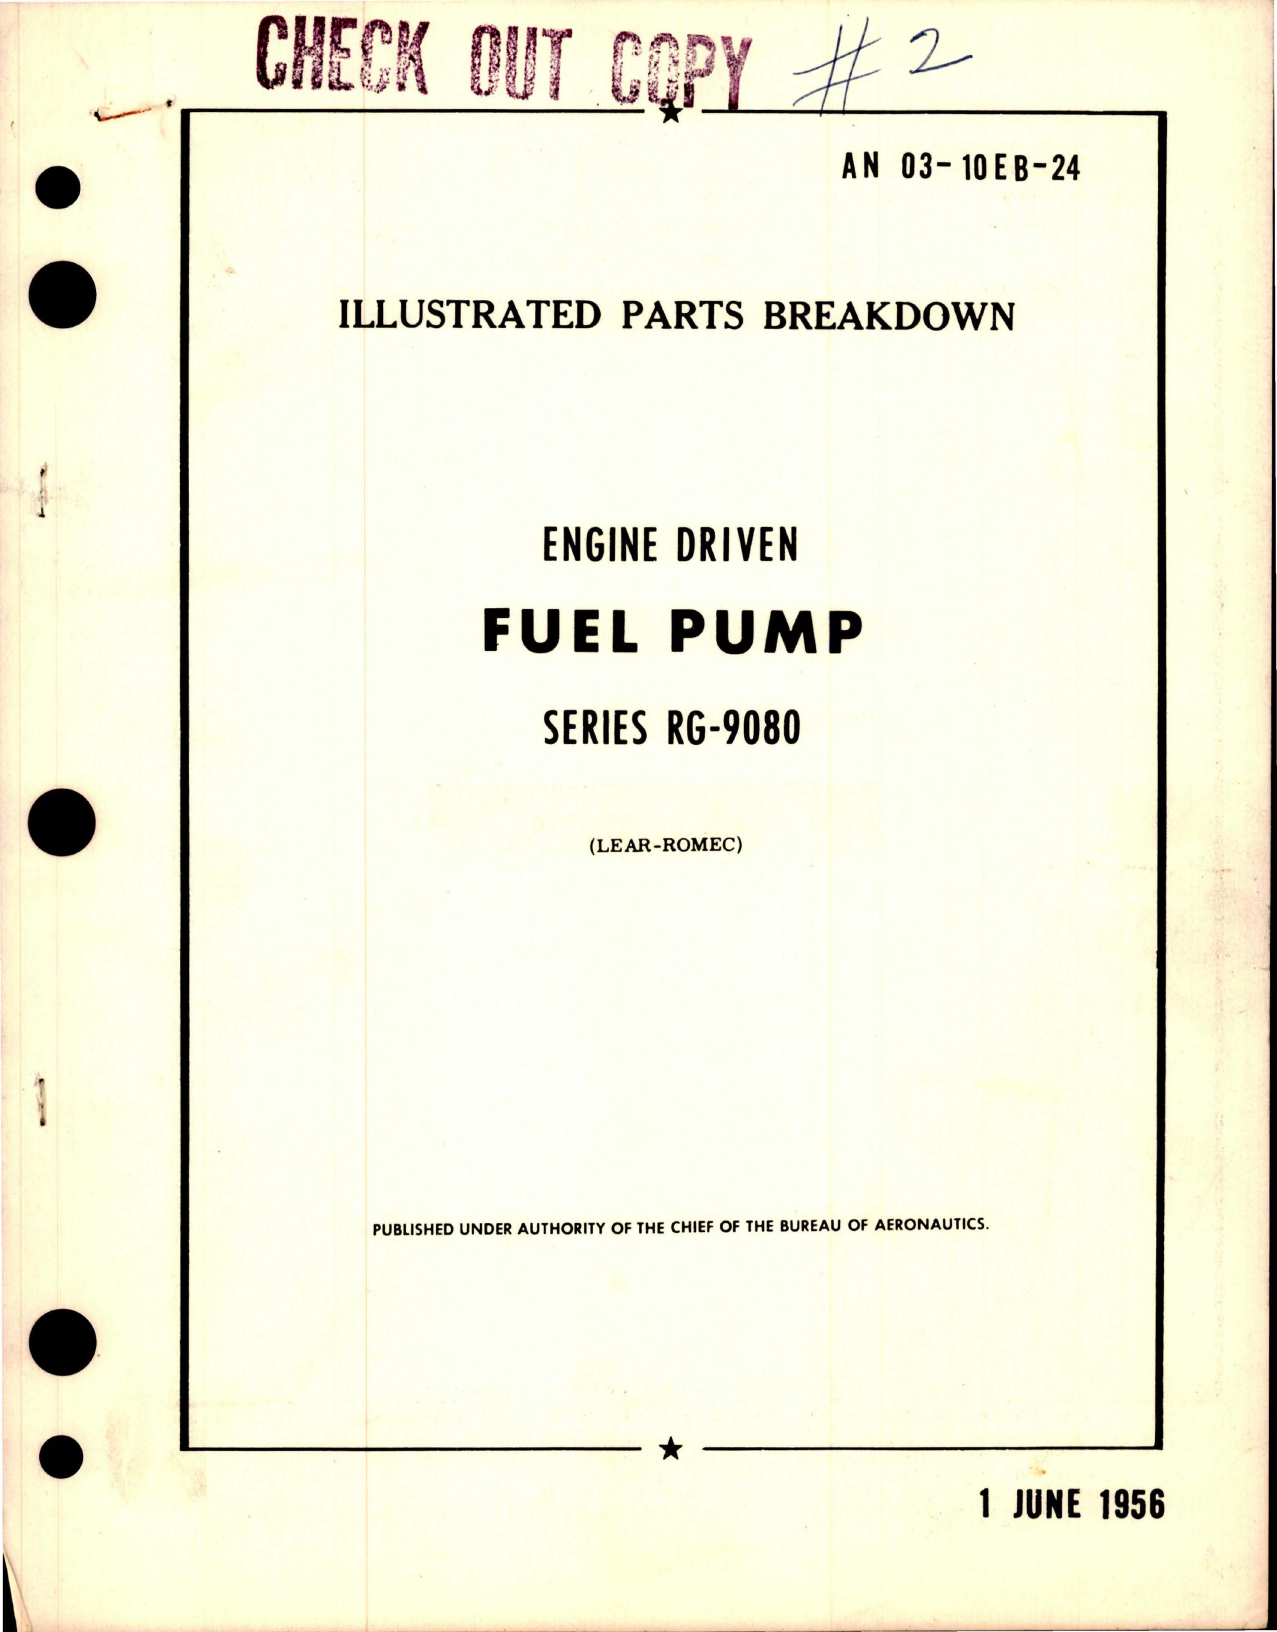 Sample page 1 from AirCorps Library document: Illustrated Parts Breakdown for Engine Driven Fuel Pump - Series RG-9080 